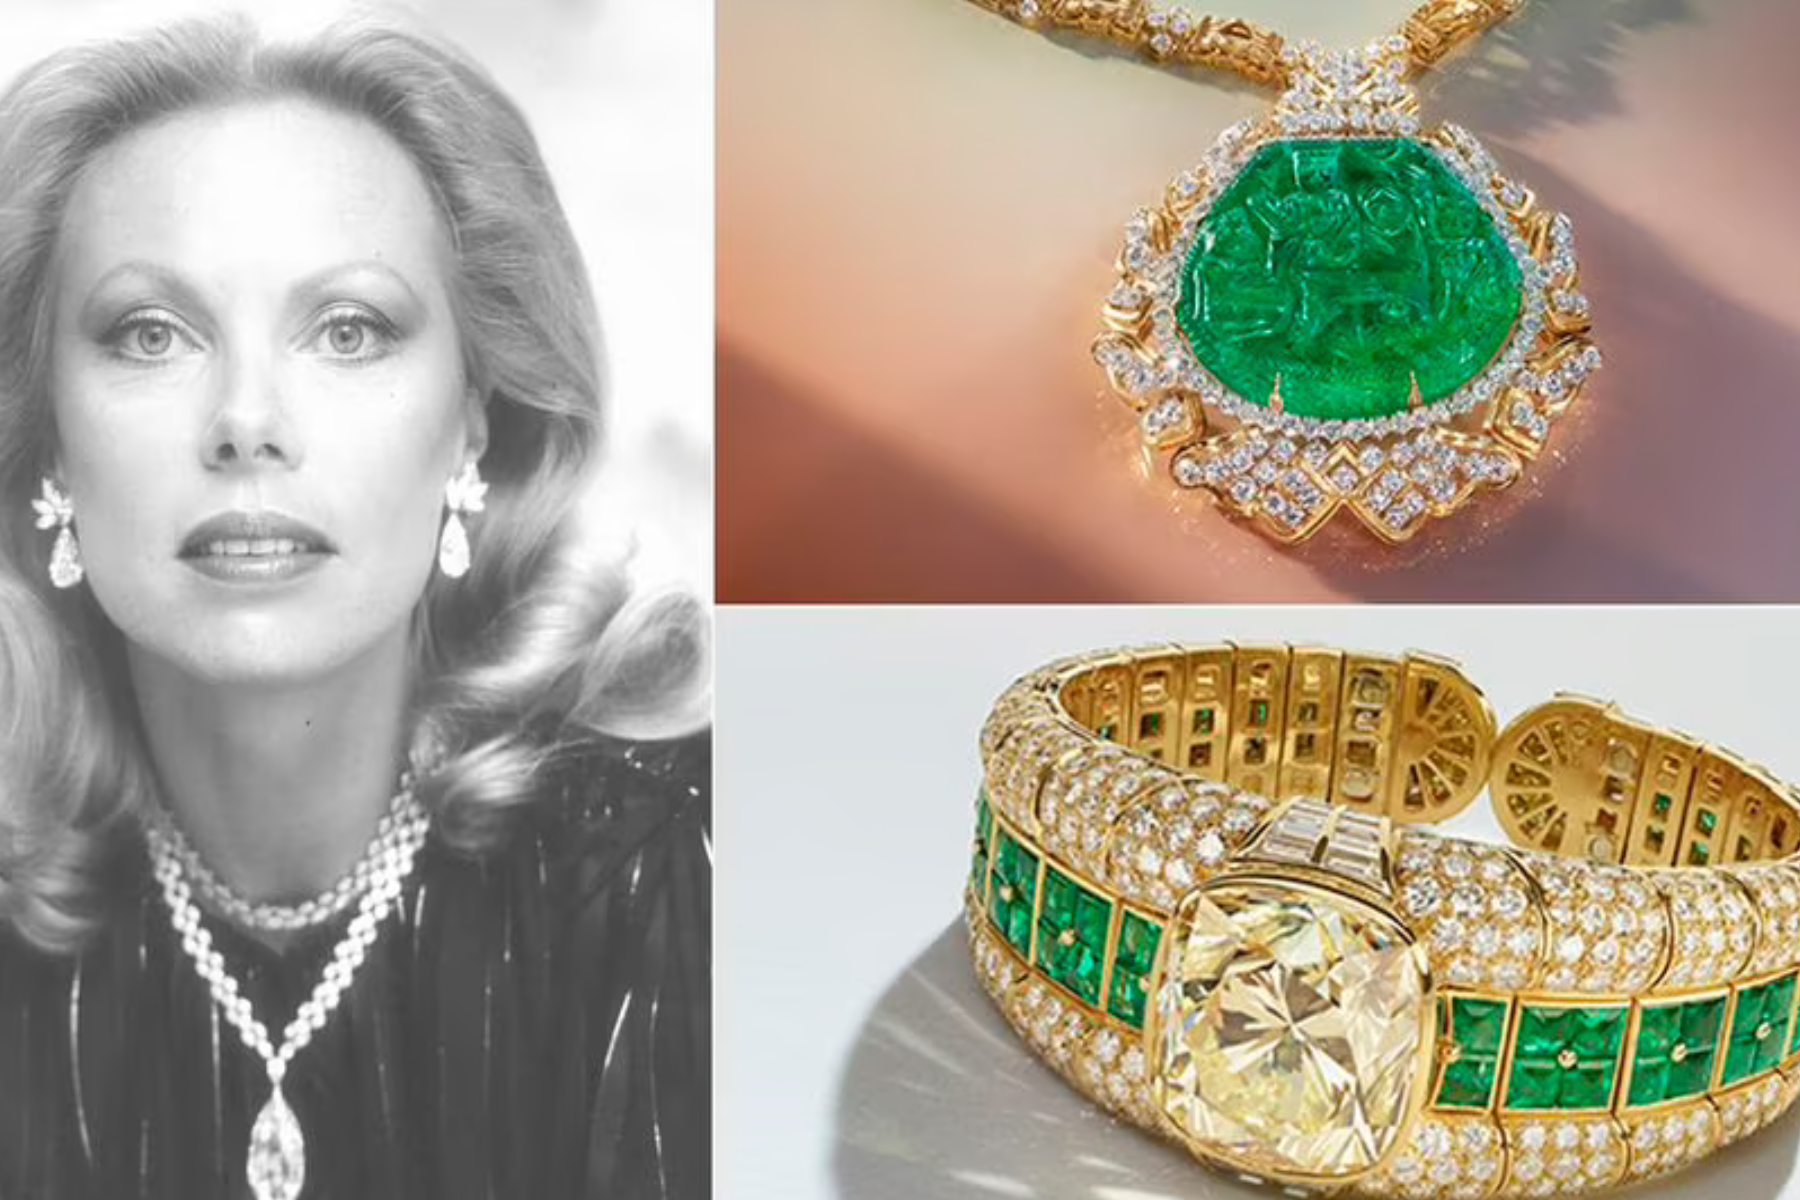 Christie’s Largest Jewelry Sale - A Billionaire Widow, Diamonds And A Fortune Built On Nazi Plunder